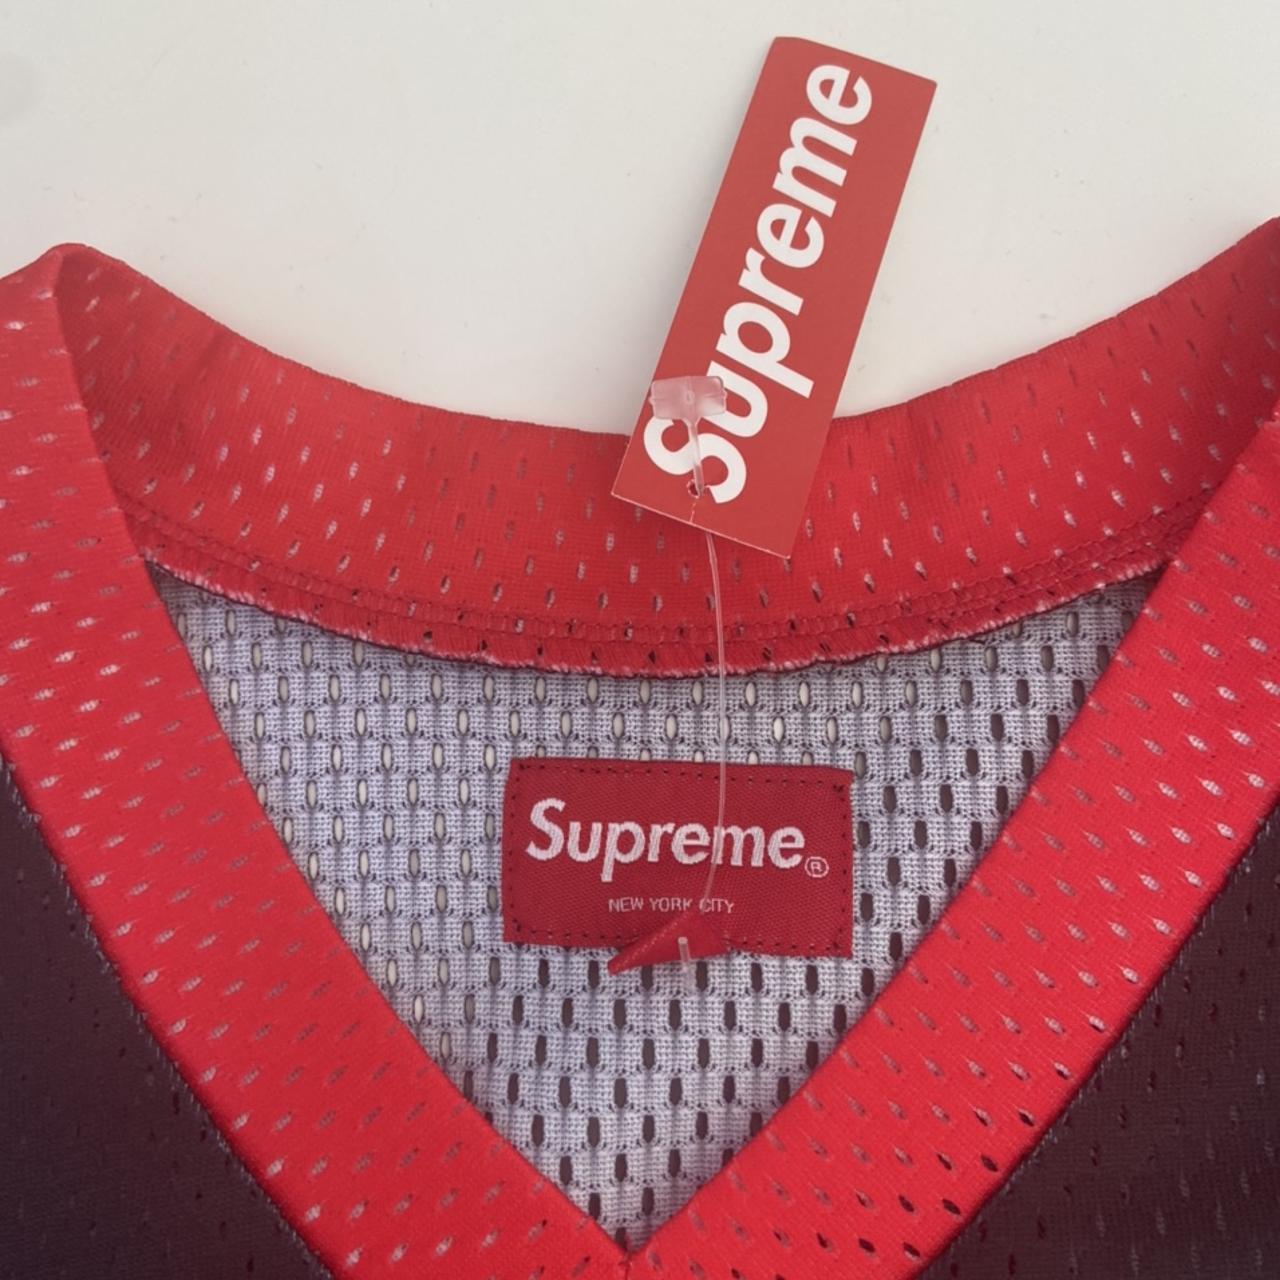 Supreme crossover hockey jersey. Never been worn...